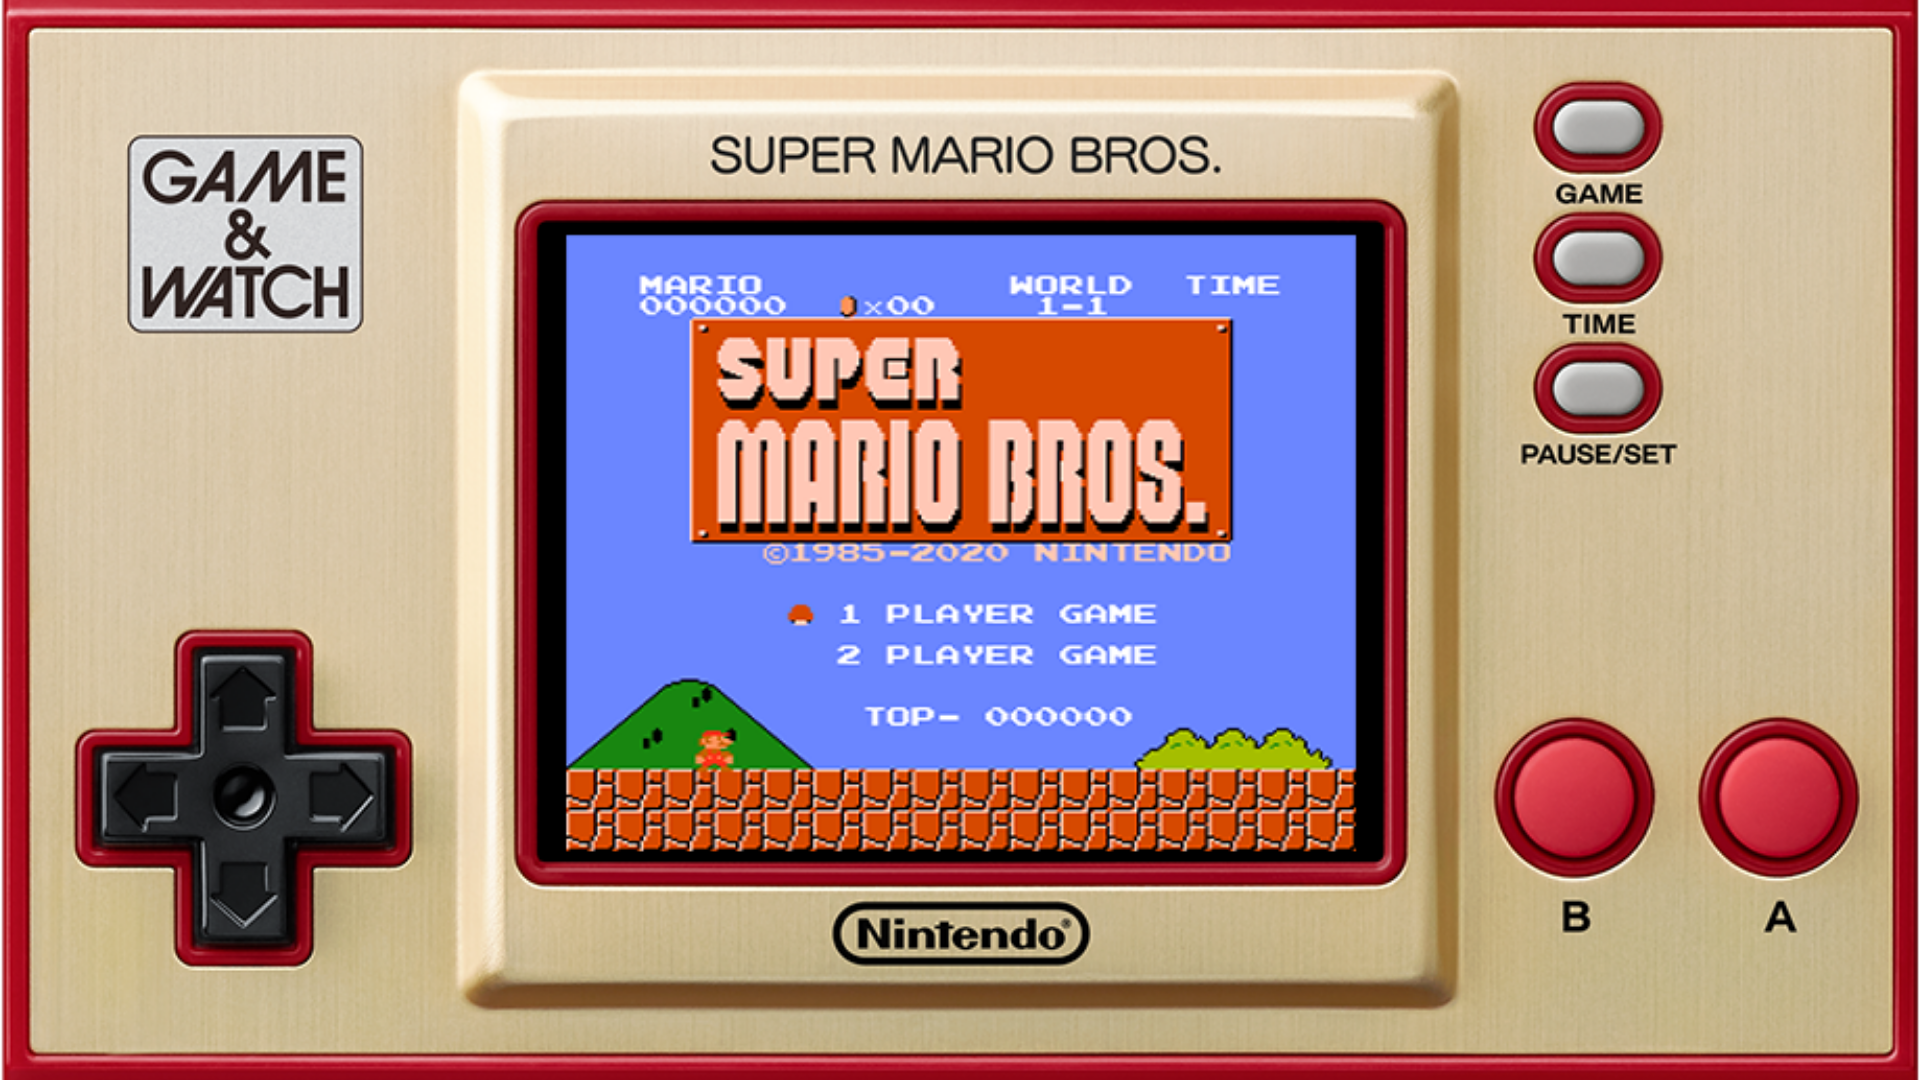 Game & Watch: Super Mario Bros. console unveiled, release scheduled for November